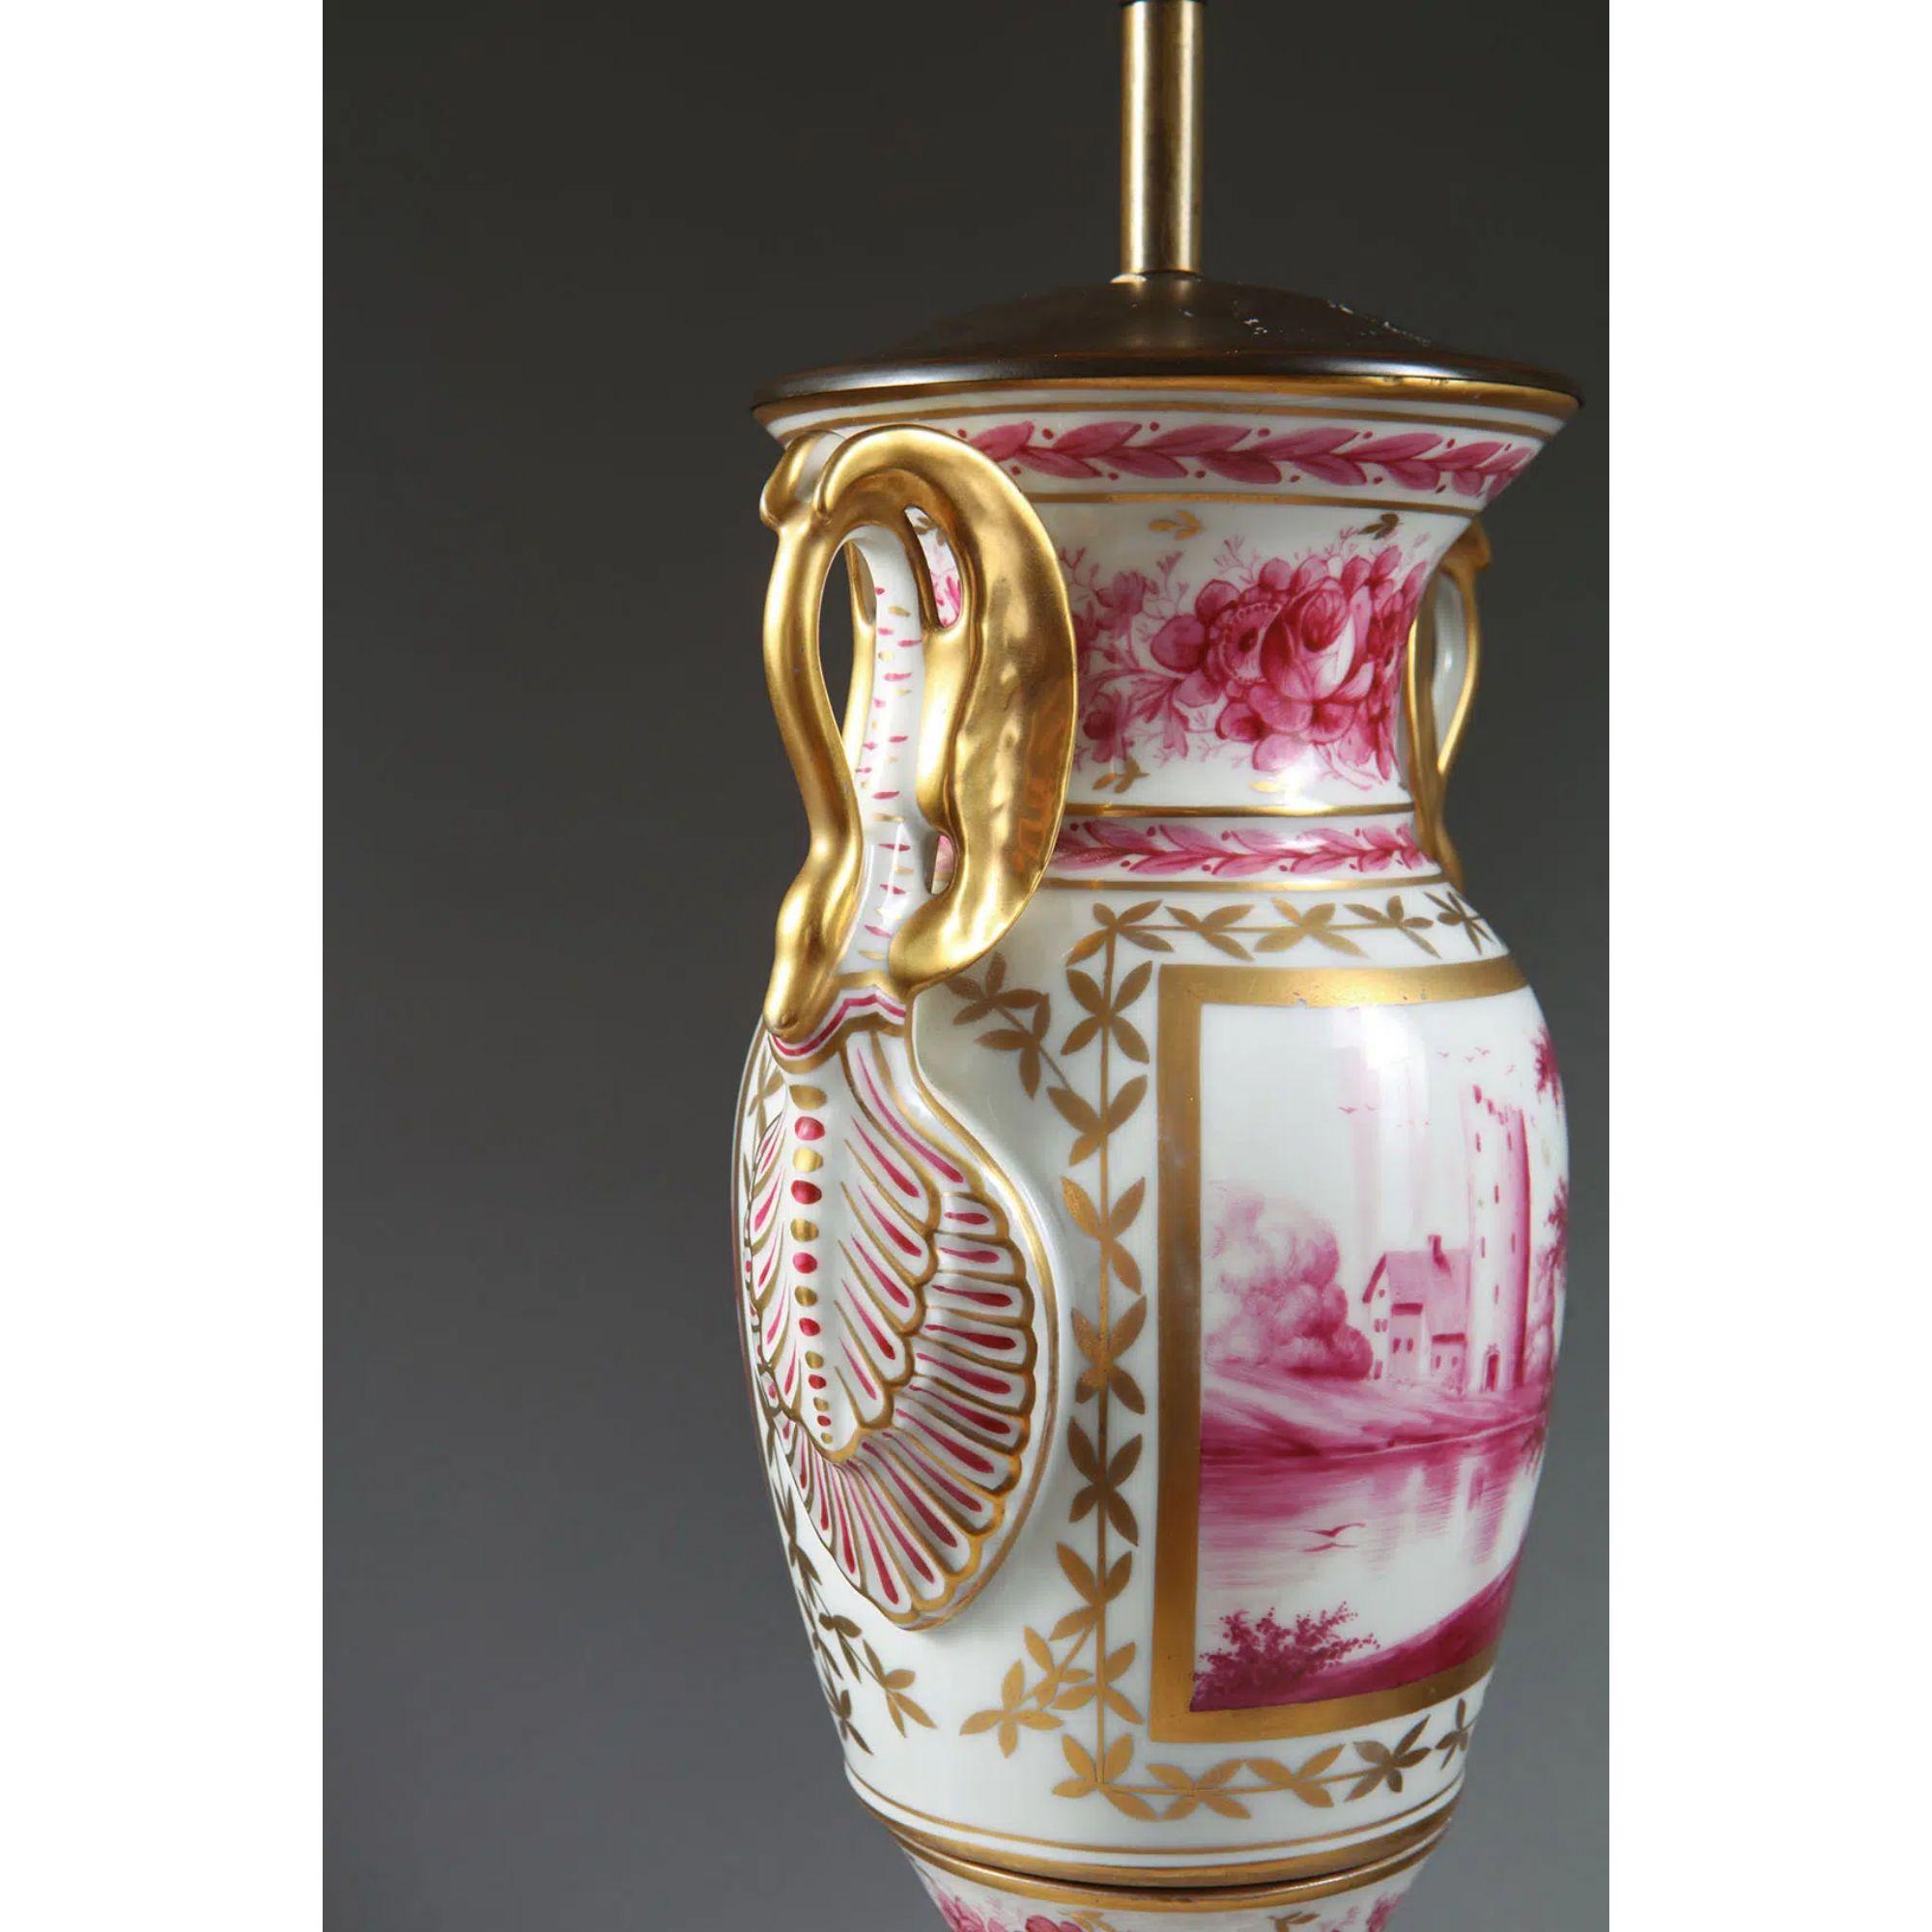 Paris Porcelain Pink and Gold over White Glazed Vase Mounted as a Table Lamp

Paris Porcelain monochrome pink pigment underglaze depicting bucolic scenes, the vases with gilt swan handles, now mounted as a table lamp and standing on a square water